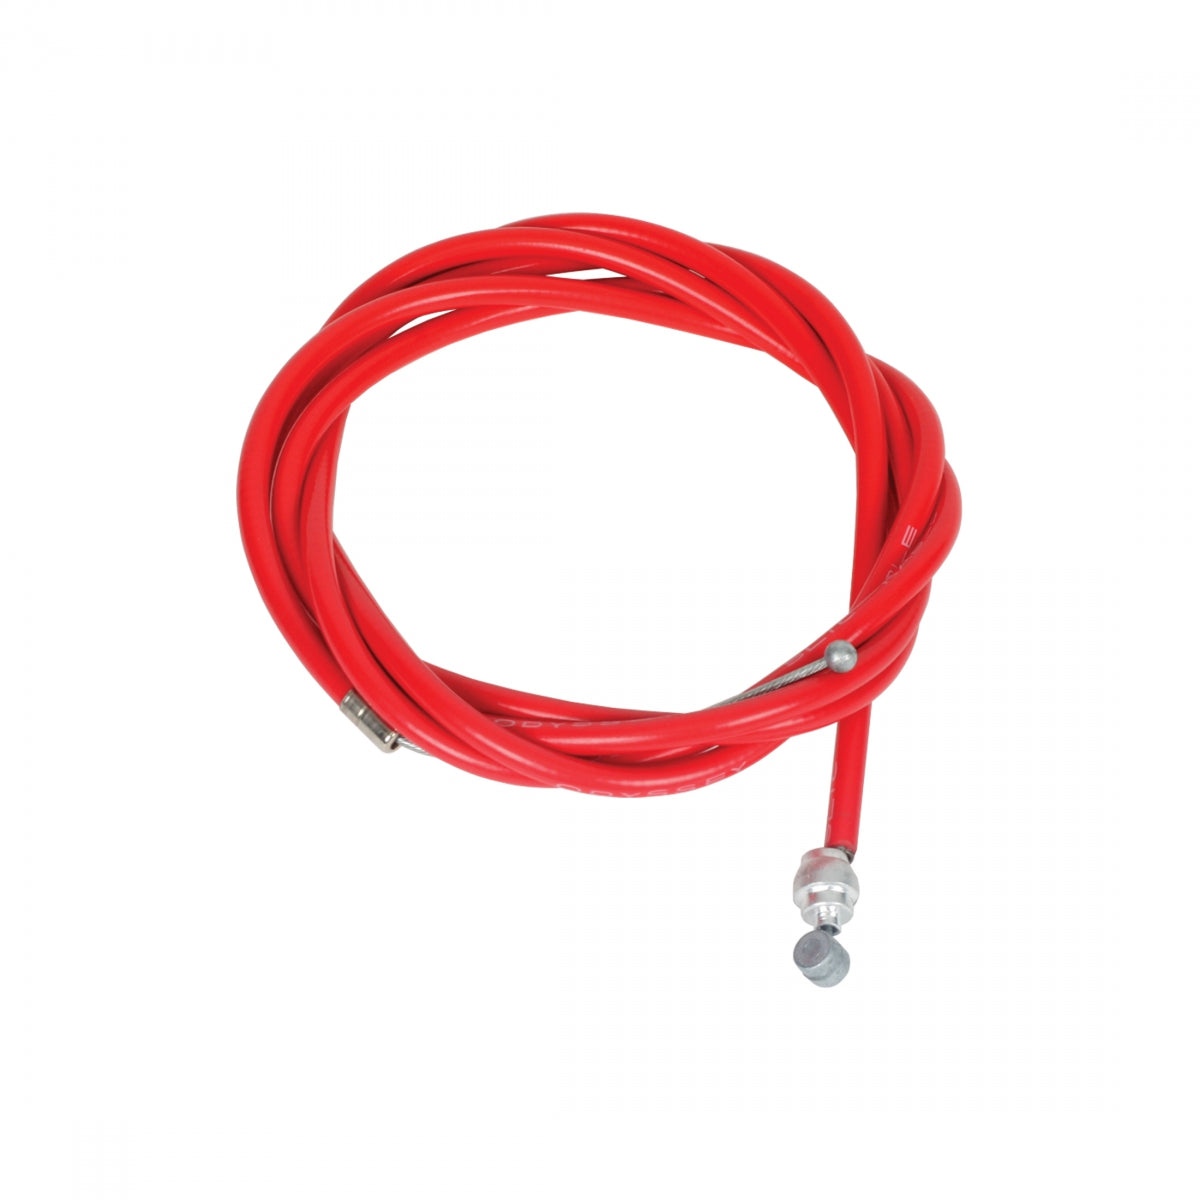 Odyssey Slic Kable Brake Cable with Housing, 1.5mm, Red